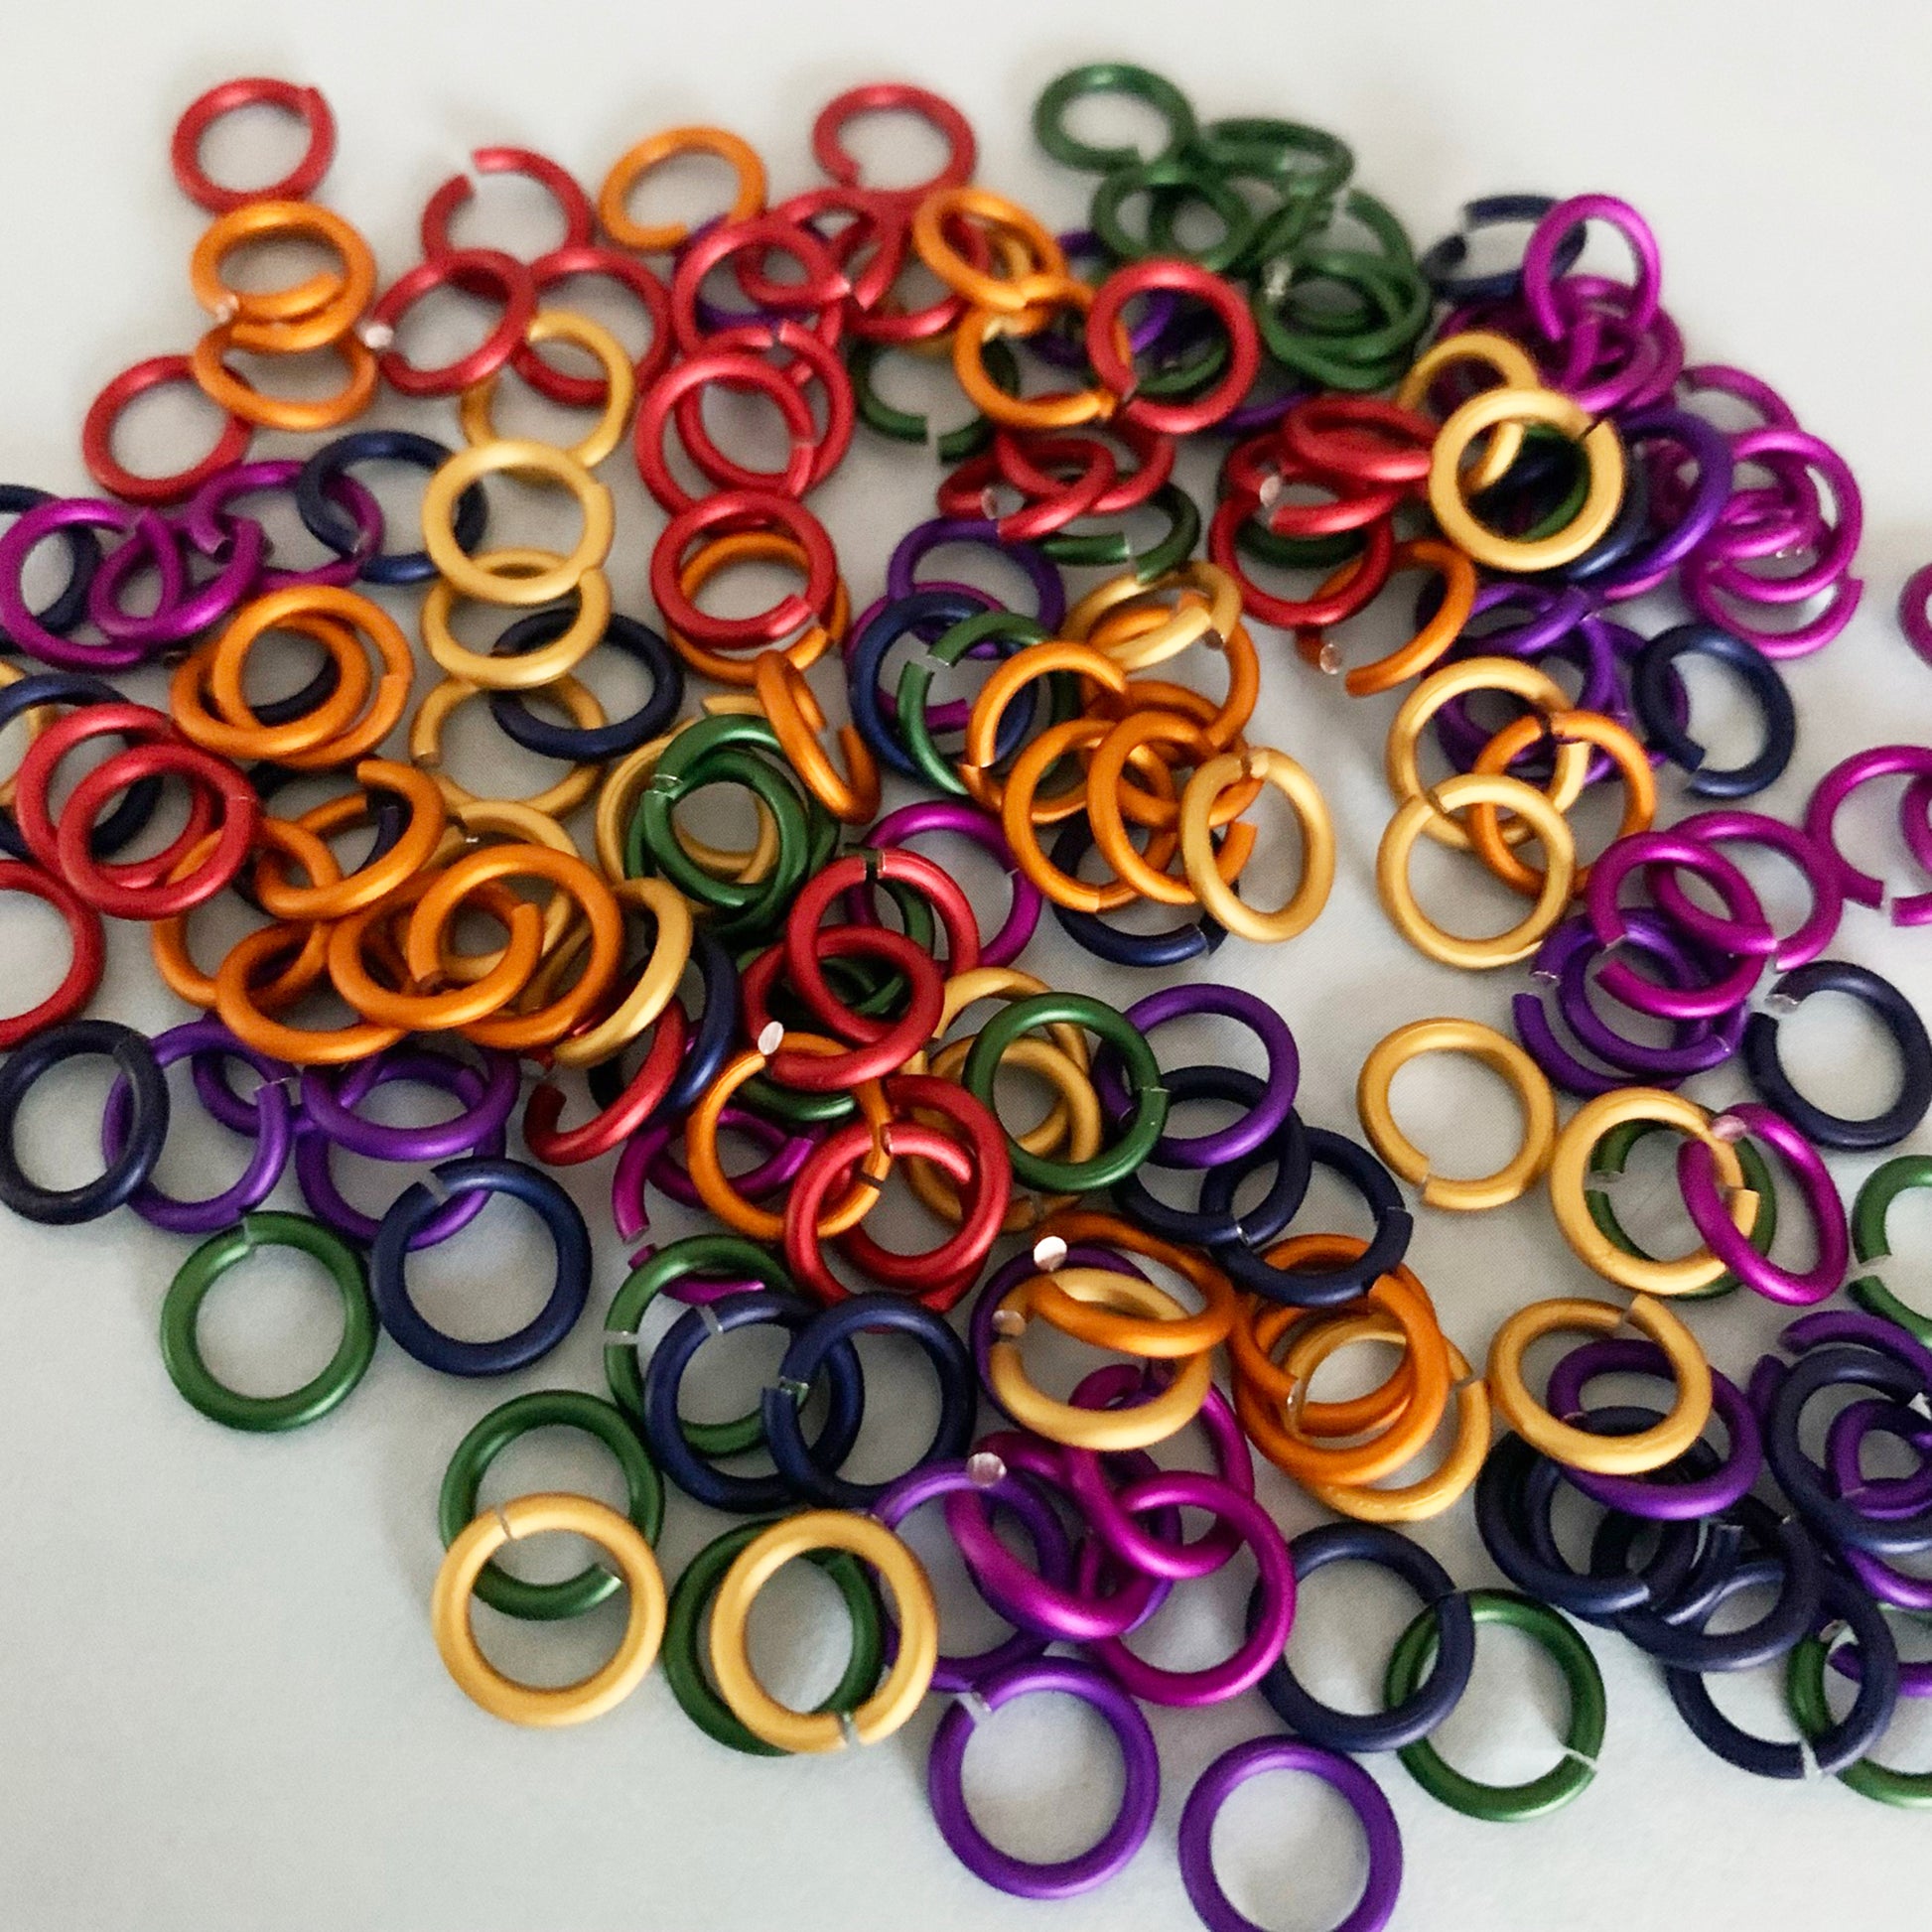 18g 3/16 Jump Rings Rainbow Mixed - hand picked- choose matte or shiny